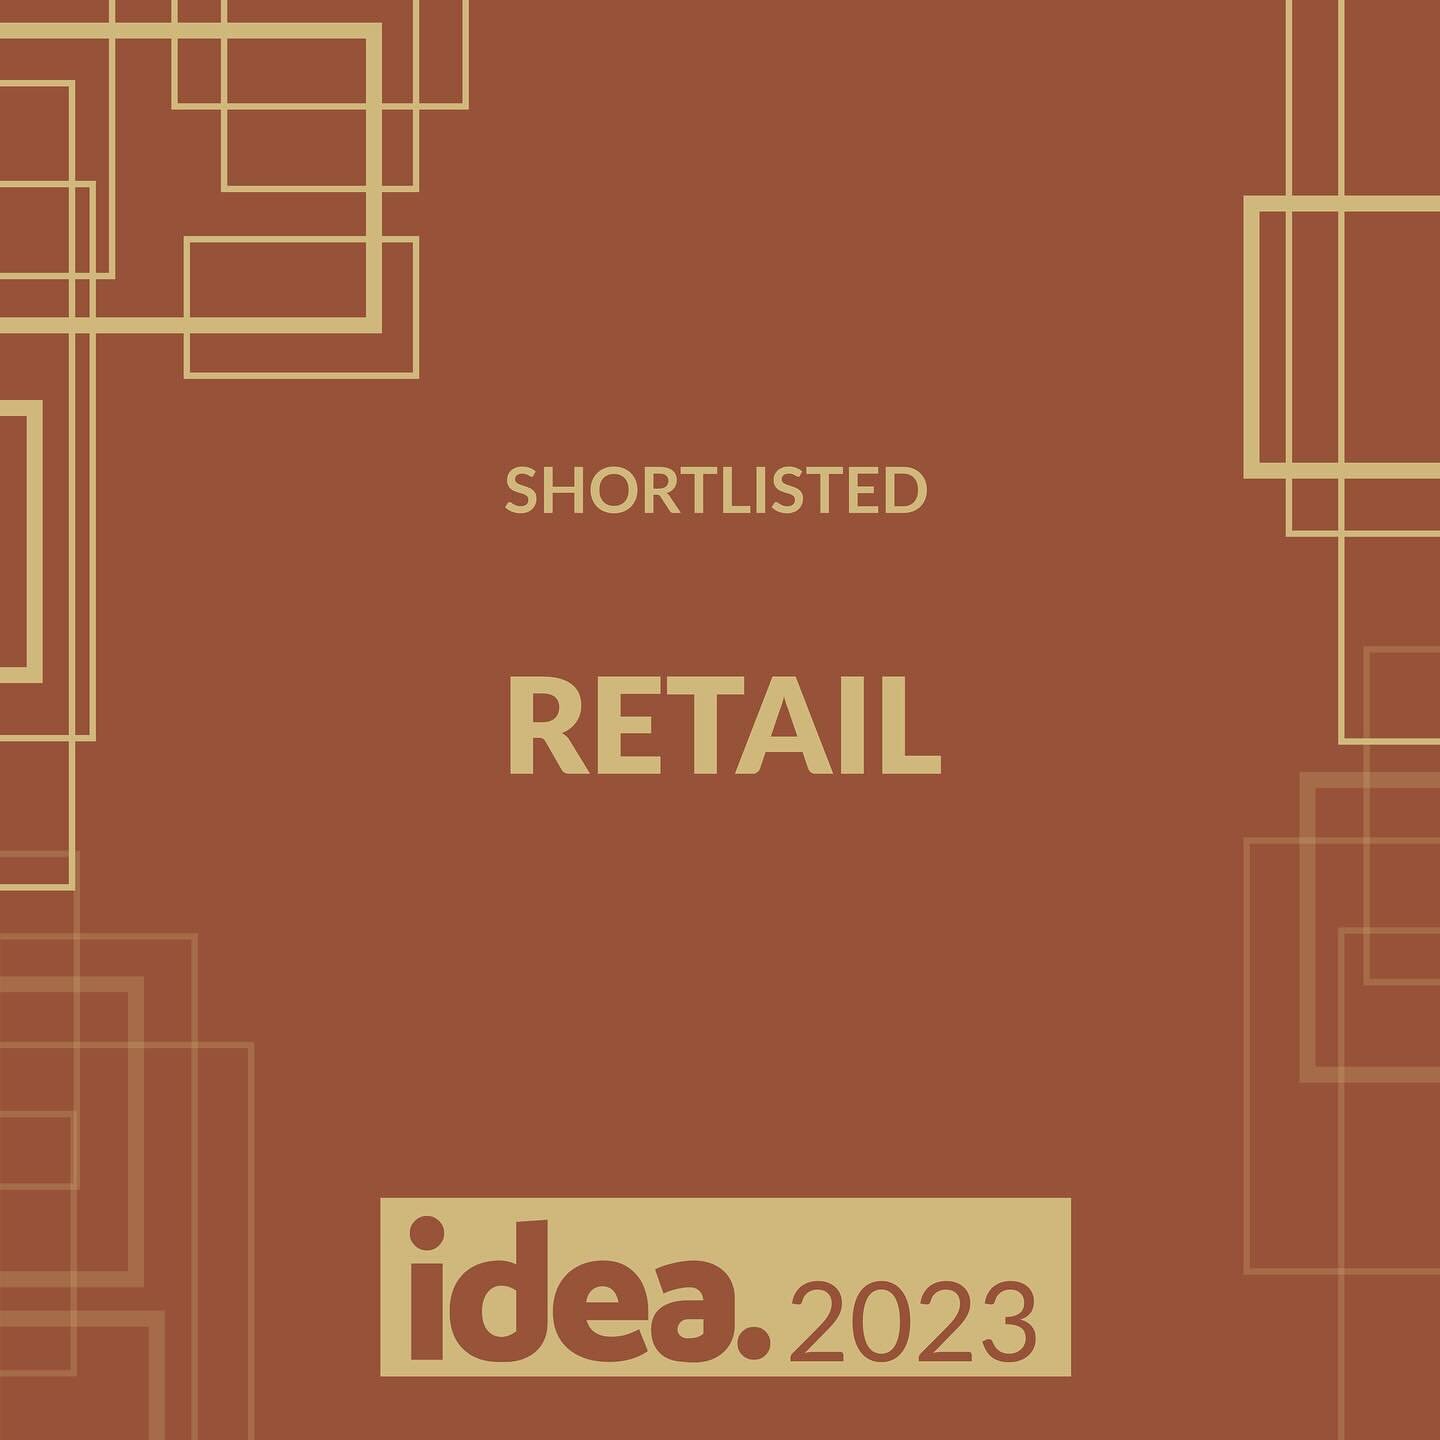 Super proud of the @studiosnell team!!

SHORTLISTED - Retail &amp; Colour Awards
Interior Design Excellence Awards (IDEA) Australia

Thanks to a wonderful Client @gsdiamonds who with bravery and business savvy are evolving their retail brand into the